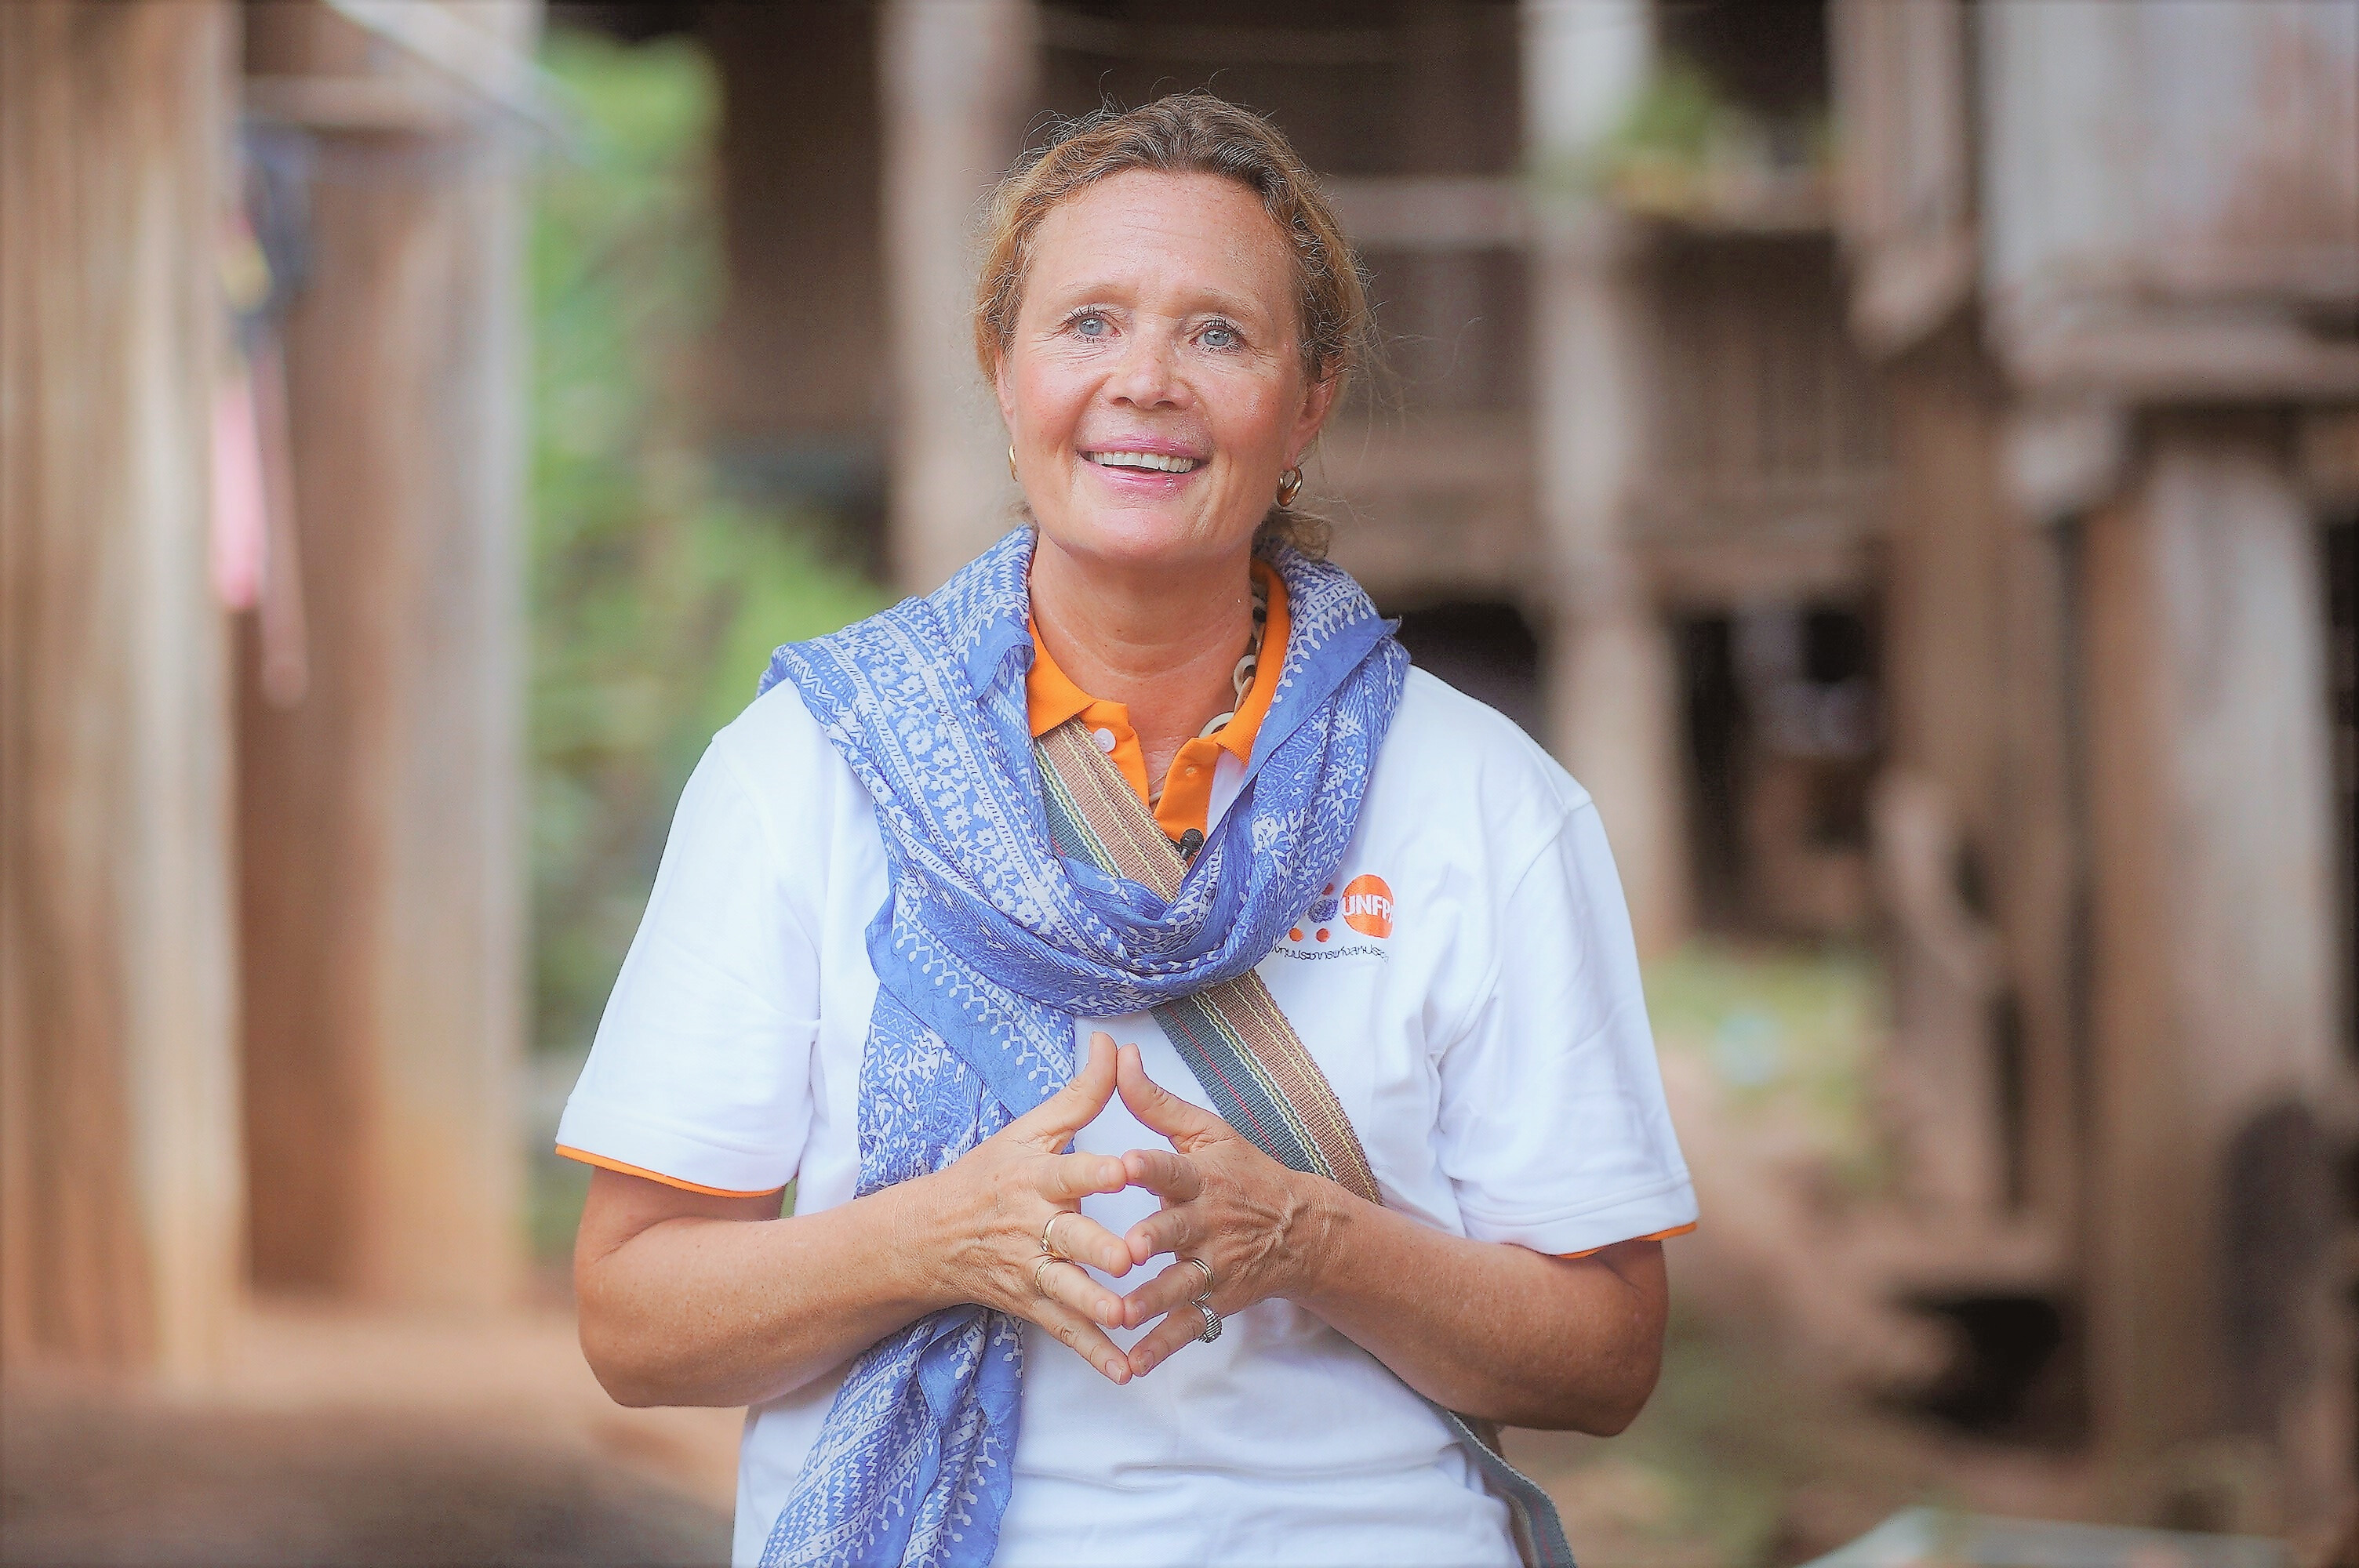 © UNFPA Thailand. Asa Torkelsson, Country Director of UNFPA Thailand, visits a local community in a remote area of northern Thailand.